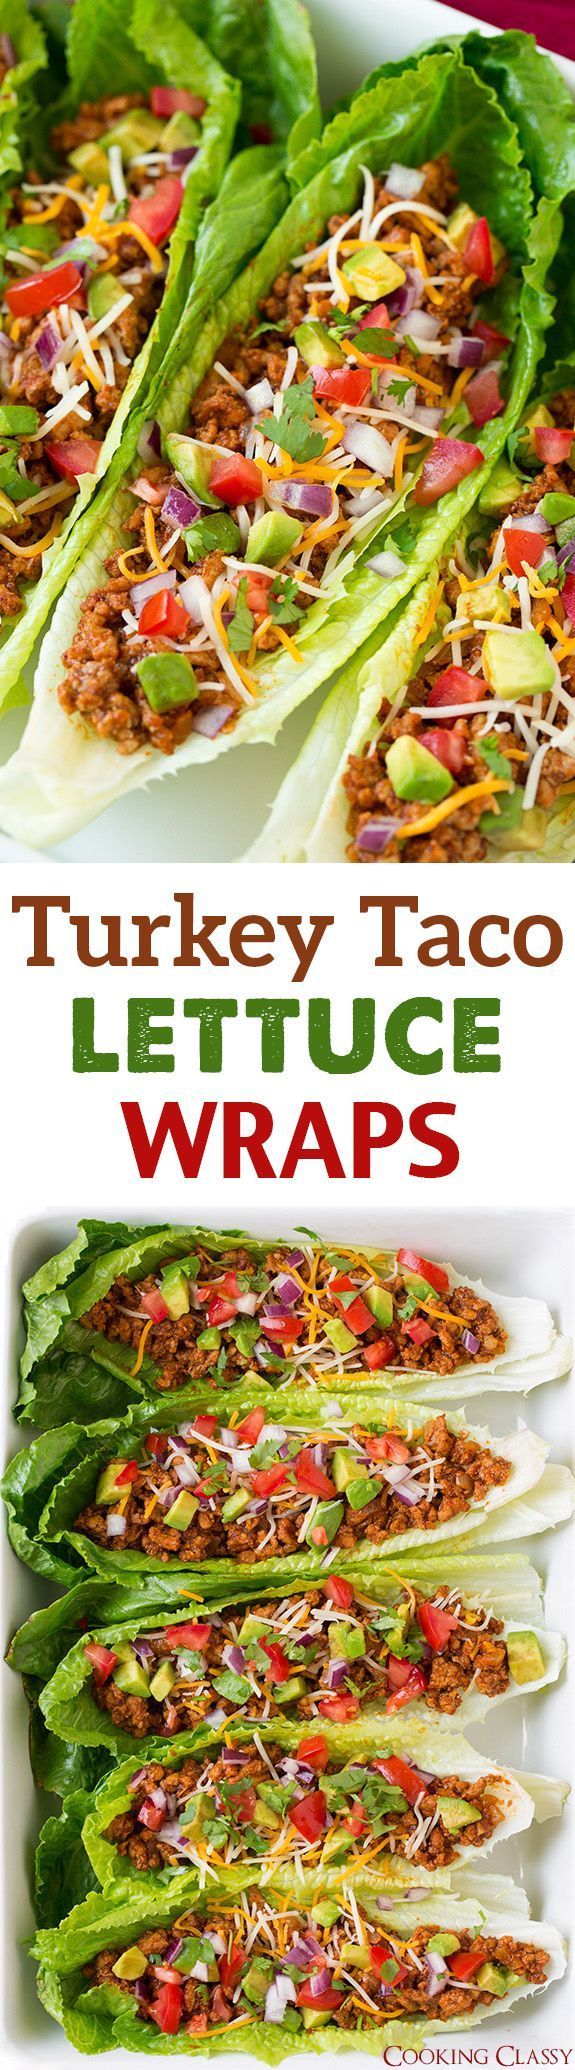 Turkey Taco Lettuce Wraps – these are incredibly delicious!! We liked them just as